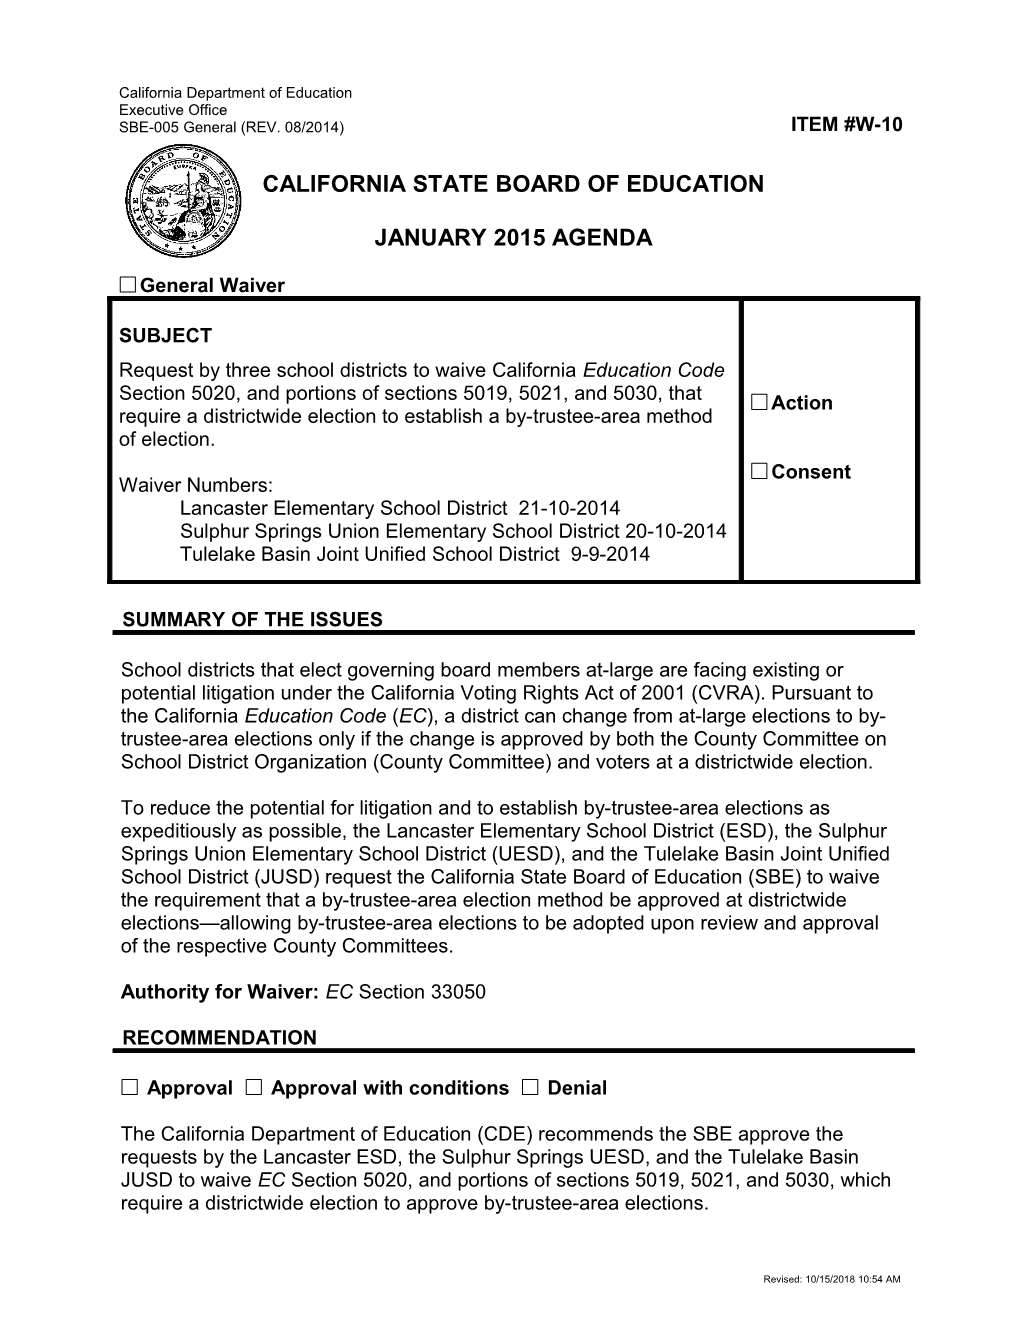 January 2015 Waiver Item W-10 - Meeting Agendas (CA State Board of Education)